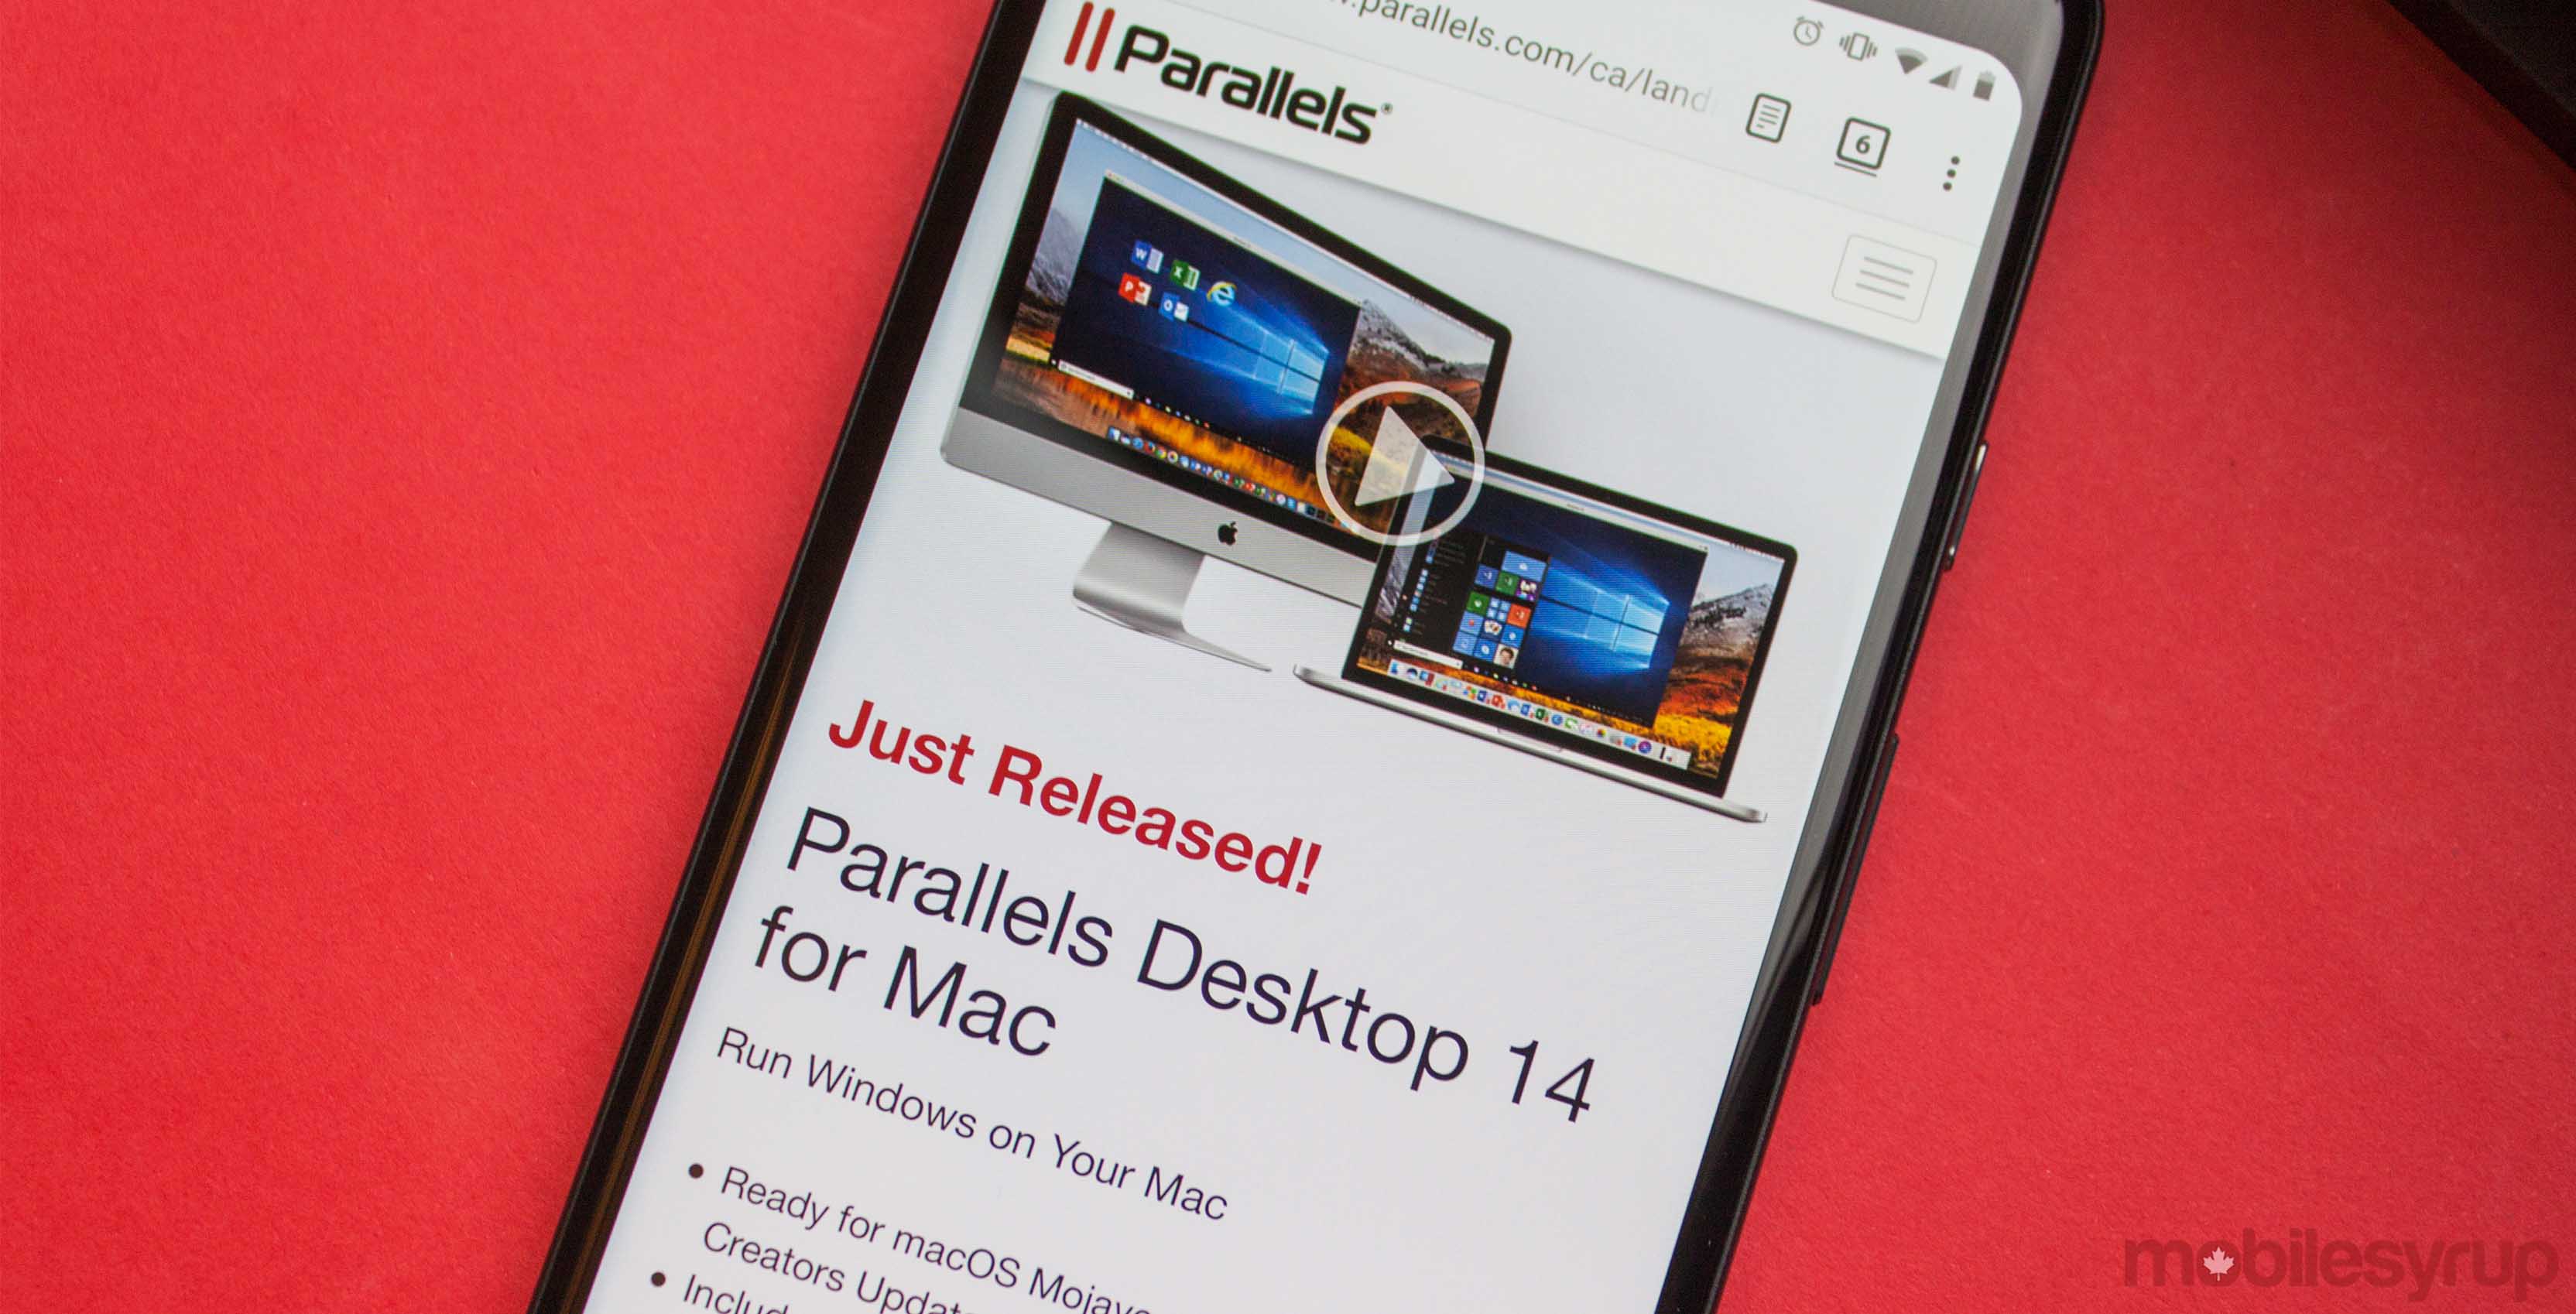 Parallels website on Android